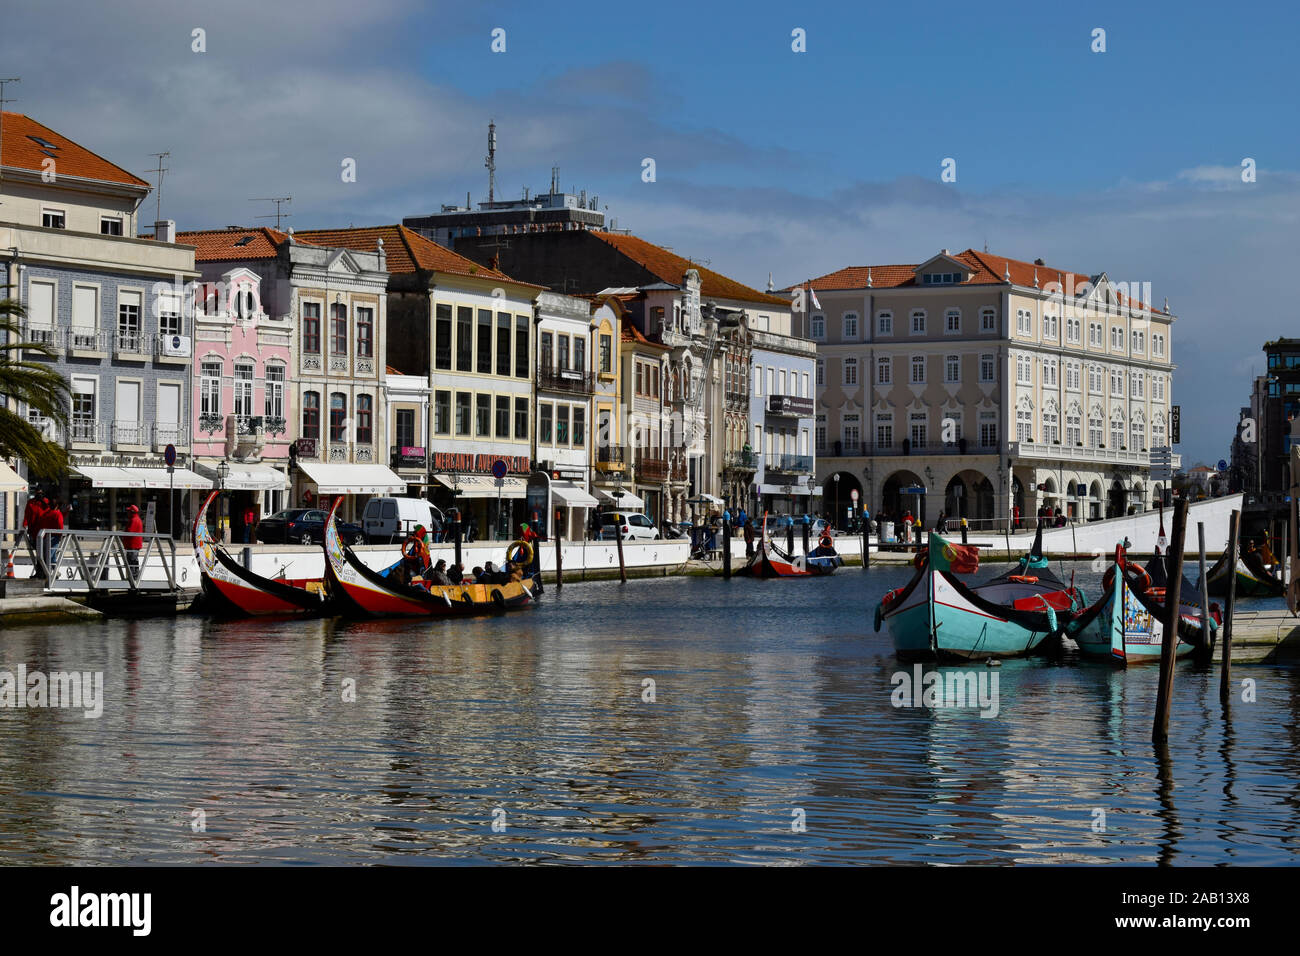 General view of central Aveiro Portugal with Moliceiro boats and art deco buildings Stock Photo